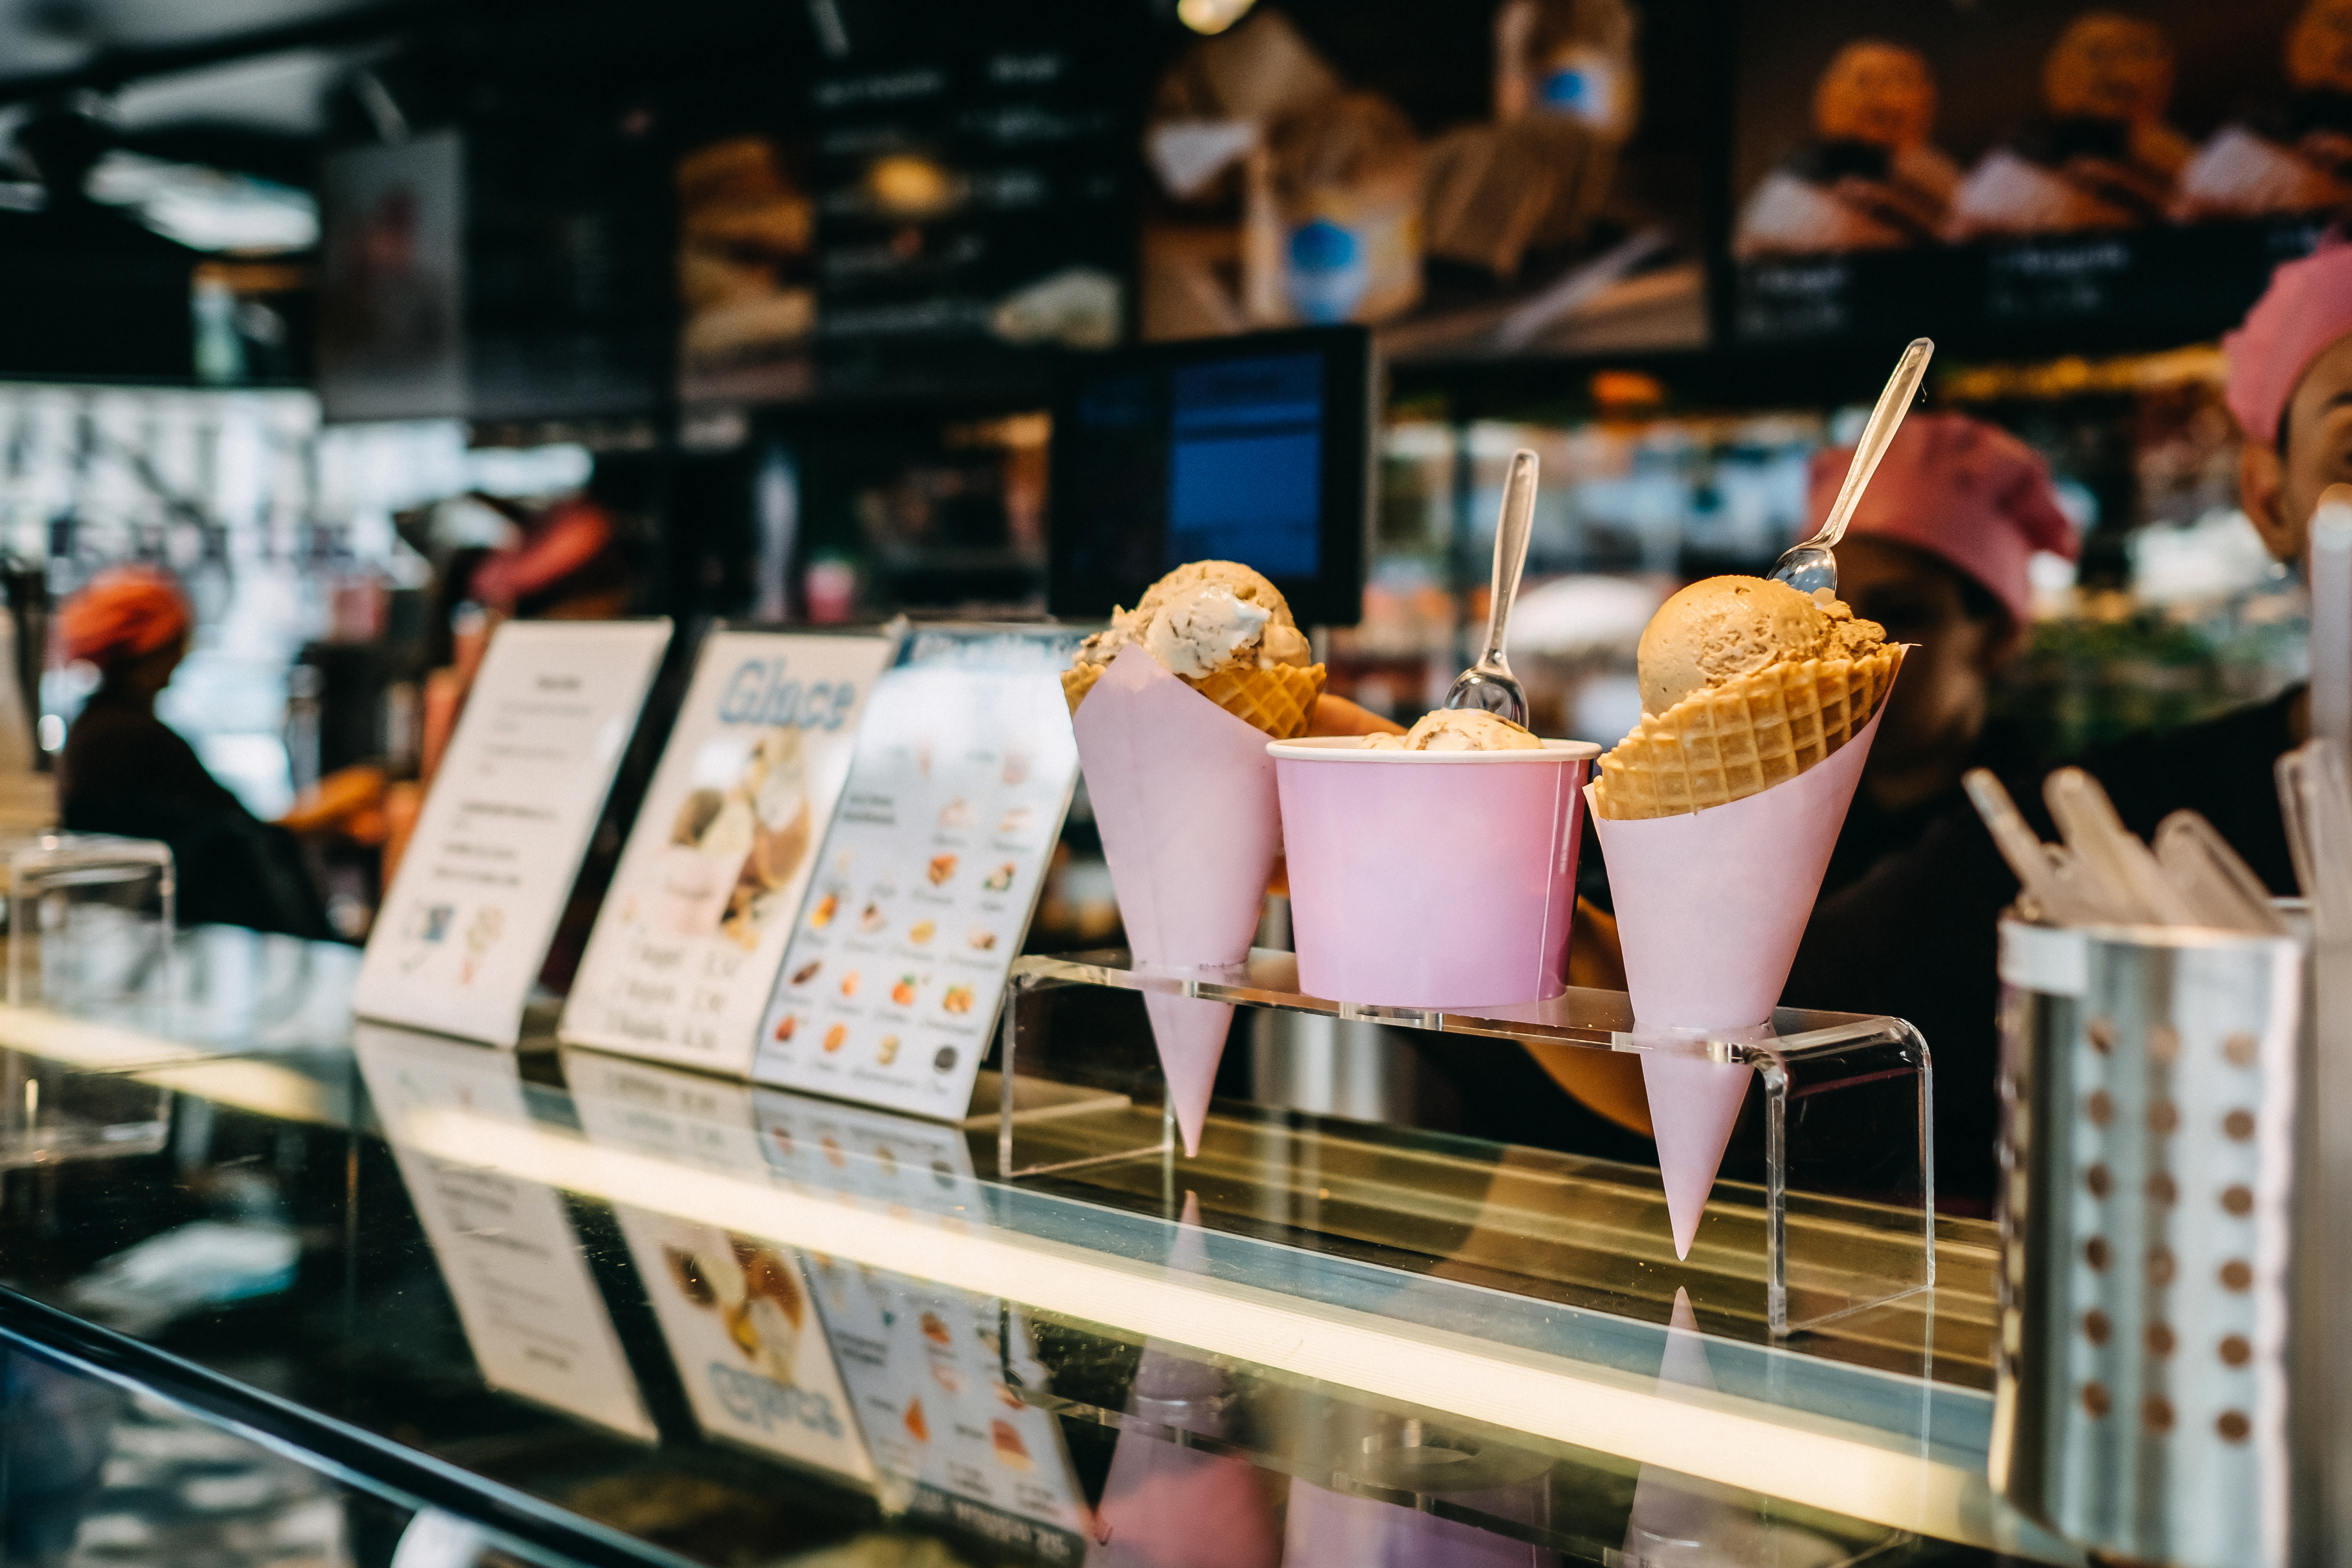 Ice cream cones on top of a glass stand